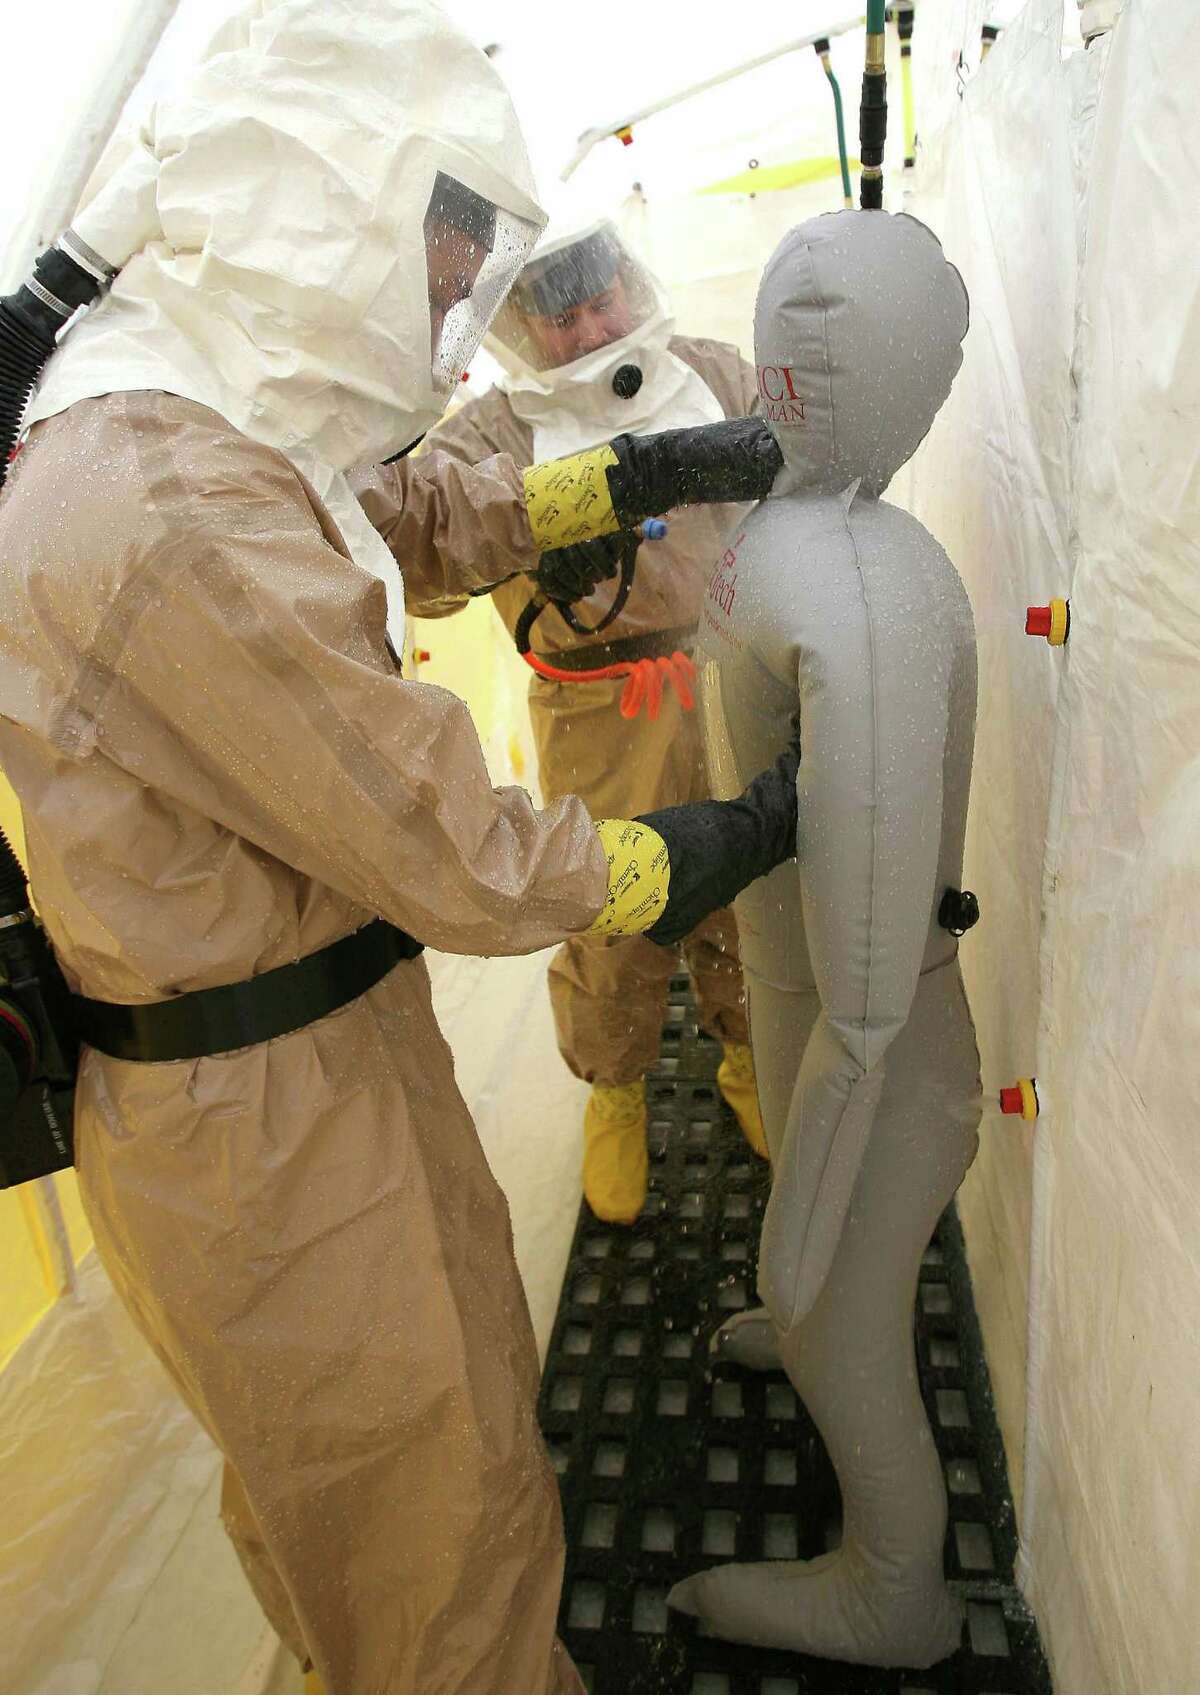 FILE - In this Friday, Nov. 4, 2011 file photo, disaster response team members Ben Olson, left, and Charles Benefield work inside a decontamination tent set up outside Banner Gateway Medical Center in Gilbert, Ariz., a suburb of Phoenix, during a state-wide drill for a nuclear disaster. The Palo Verde Nuclear Generating Station is about 50 miles west of the center of Phoenix. In changes which went into effect on December 2011, the U.S. government is allowing communities within 50 miles of nuclear power plants to practice less often for major accidents and is recommending that far fewer people who live nearby be evacuated immediately. Under new emergency planning rules, federal regulators also are ending a requirement that emergency personnel always practice for a release of radiation. (AP Photo/East Valley Tribune, Tim Hacker)